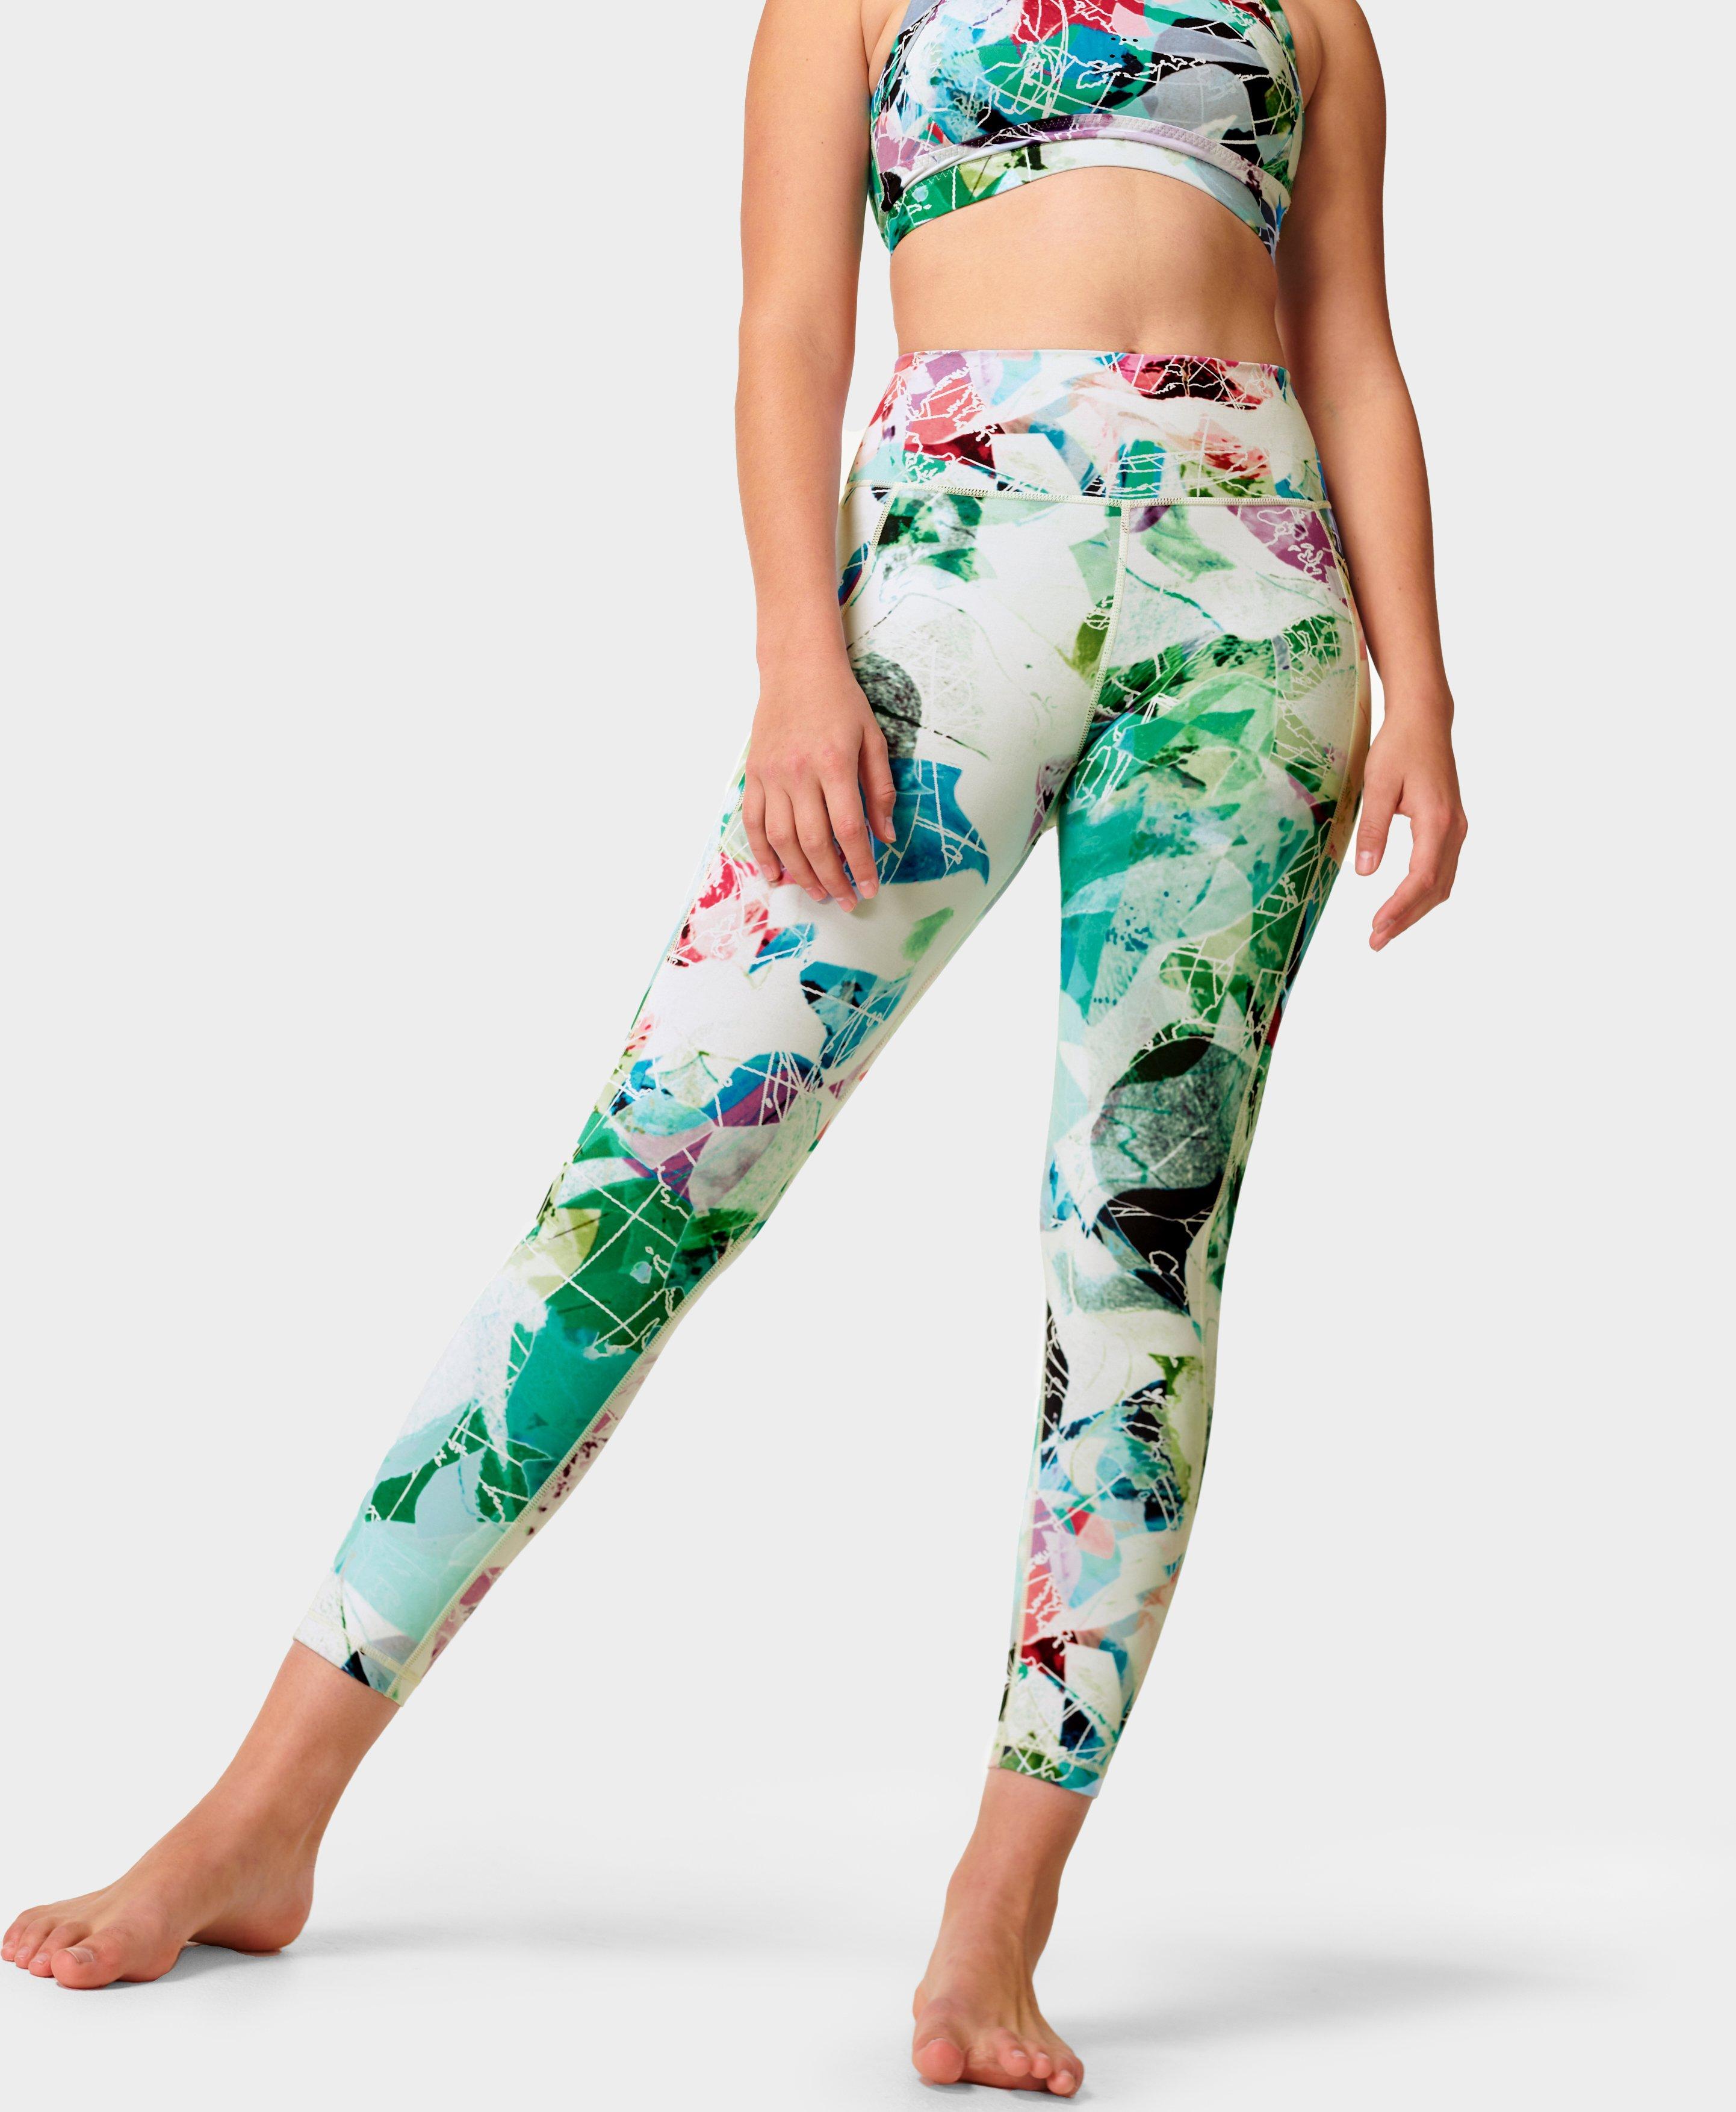 Sweaty Betty Super Soft 7/8 Leggings  Anthropologie Japan - Women's  Clothing, Accessories & Home